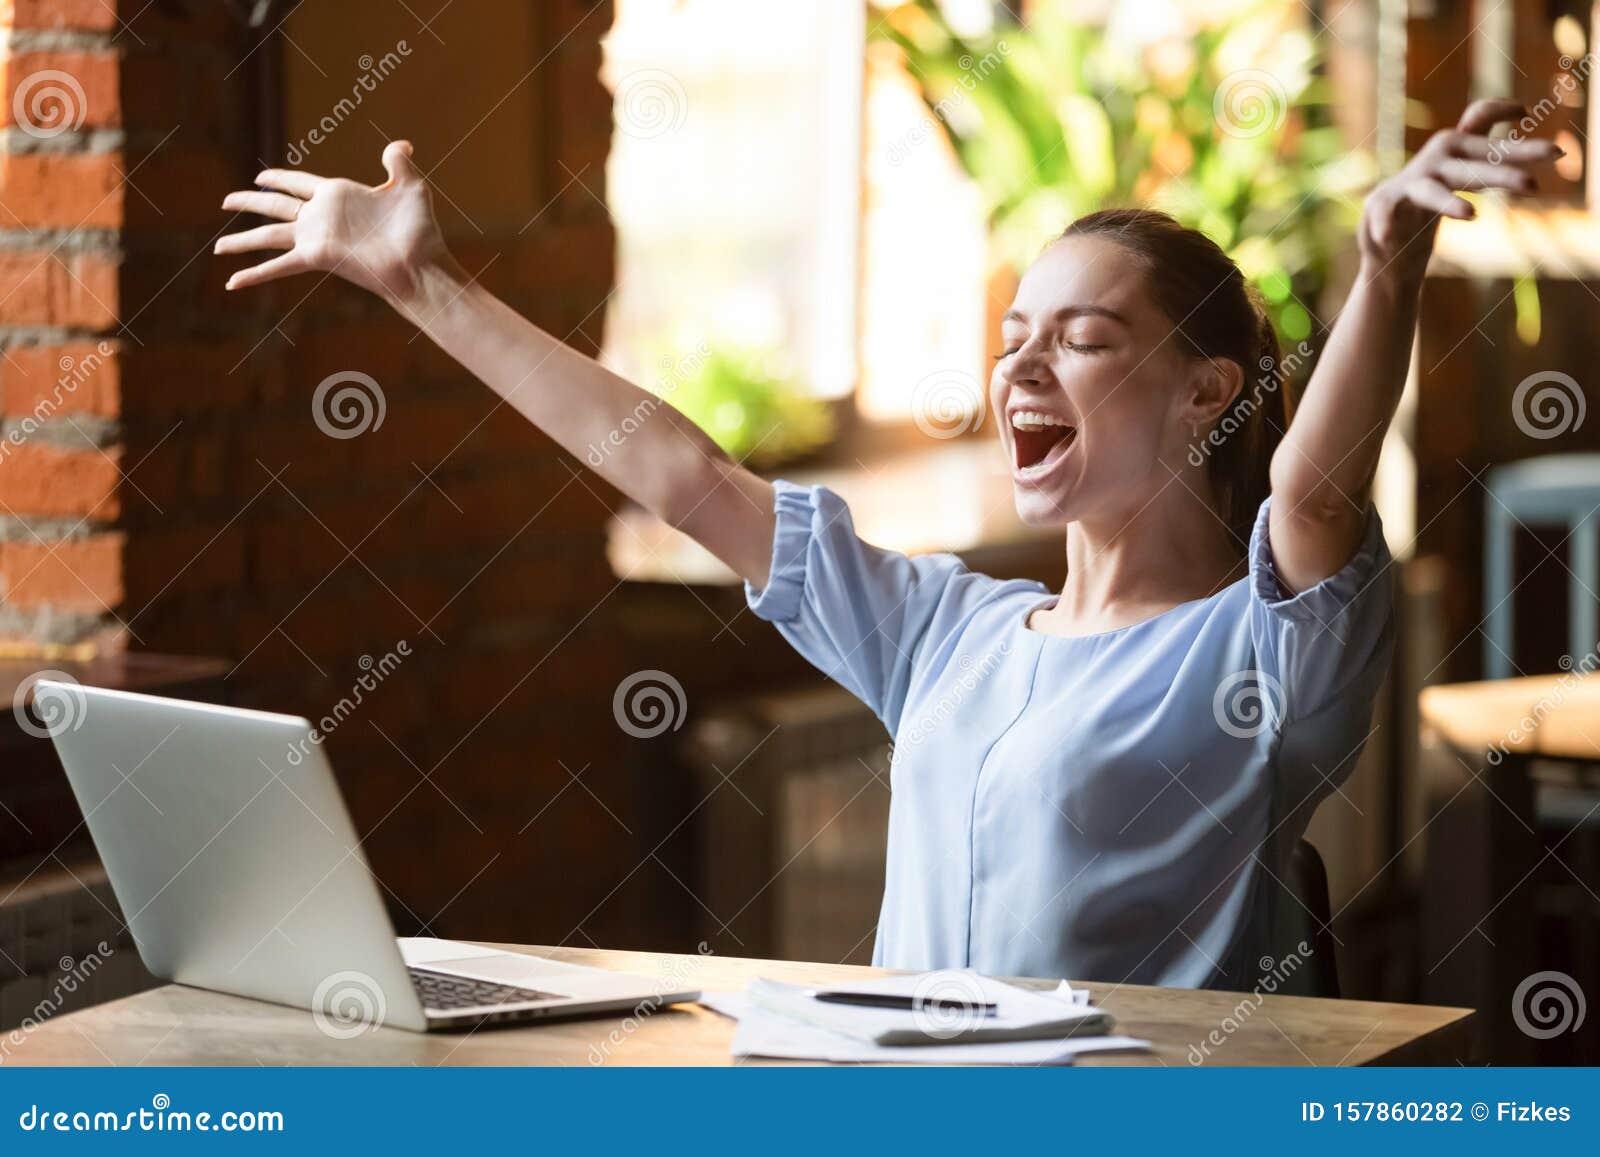 excited smiling woman celebrating online win, using laptop in cafe